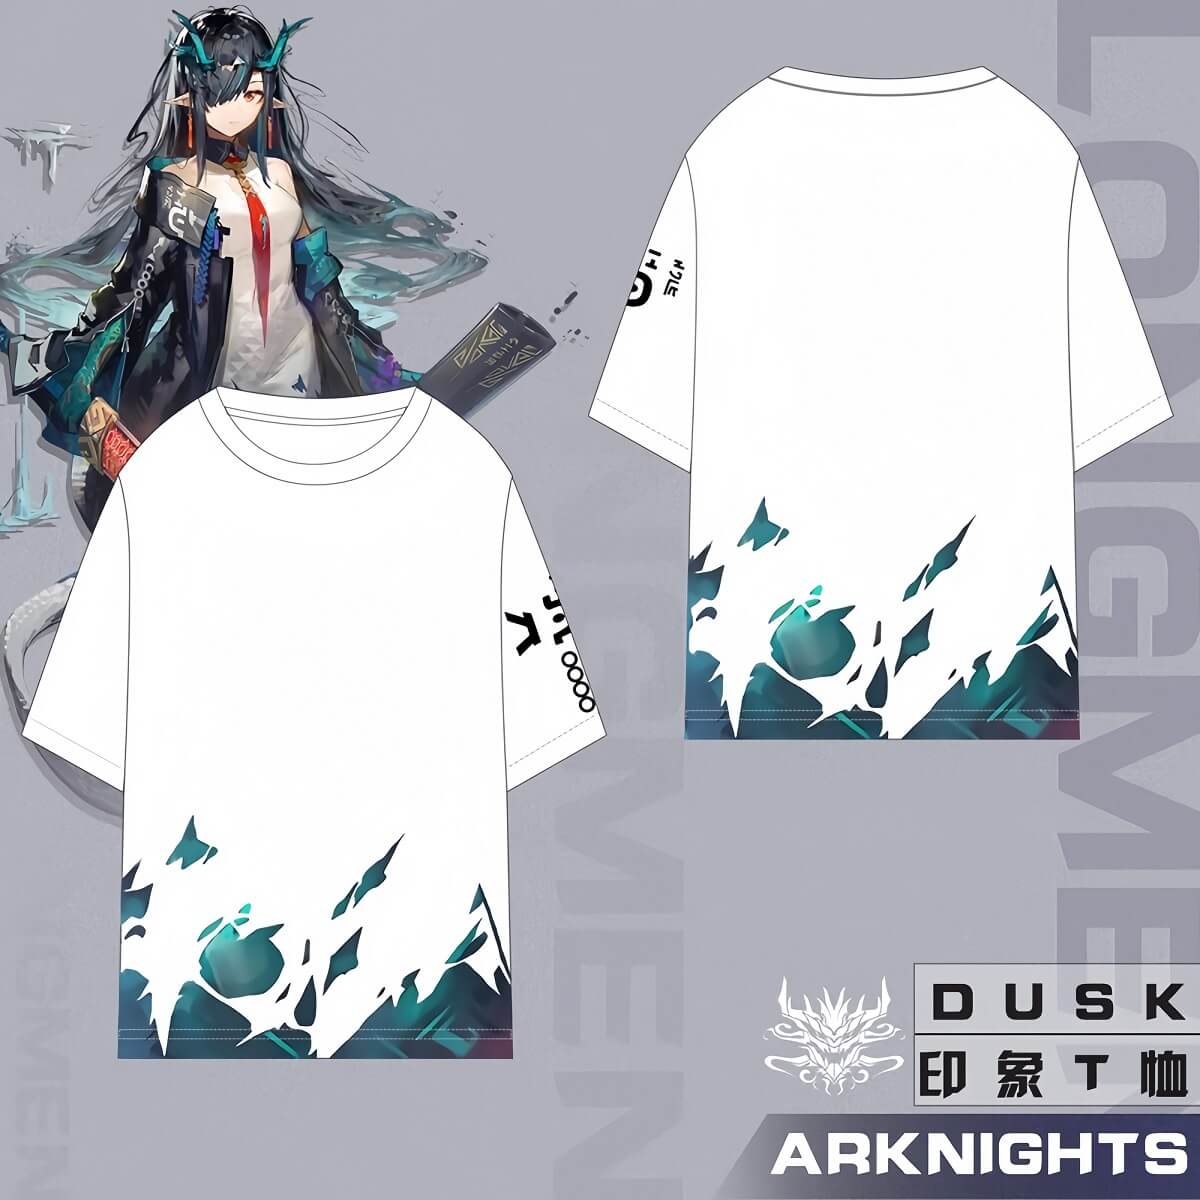 Arknights Dusk character style T-shirt